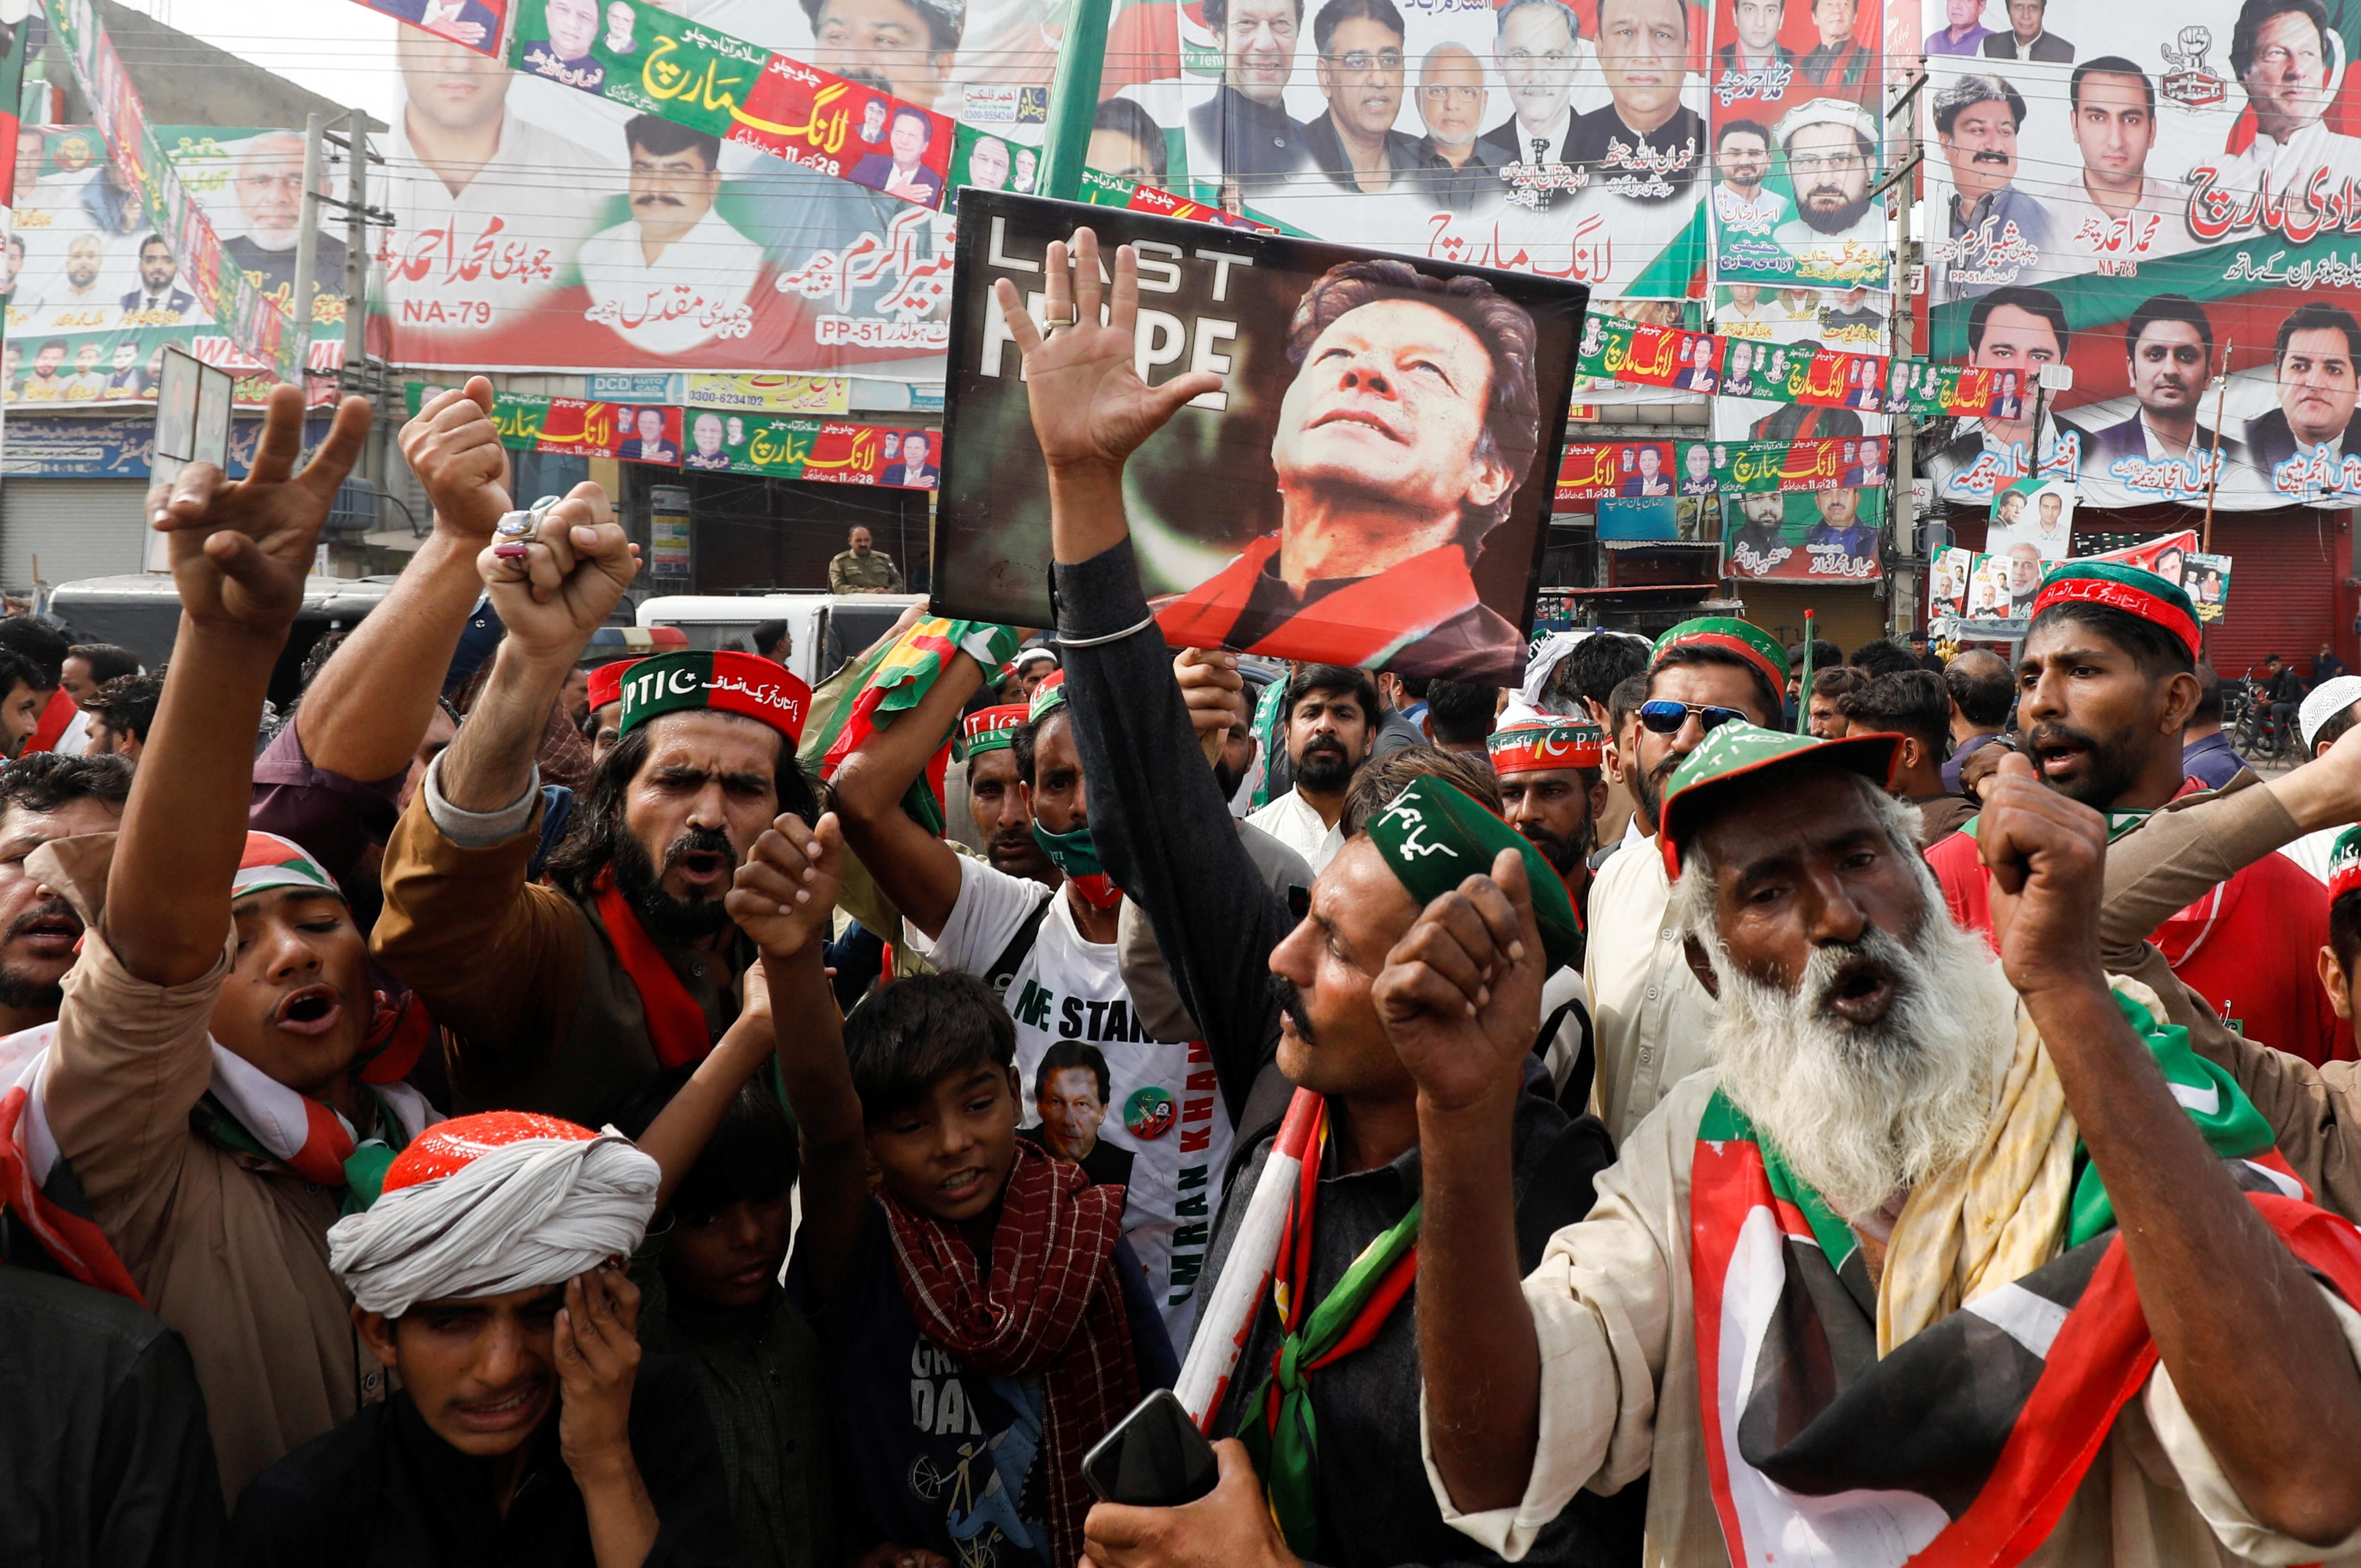 Imran Khan supporters chant slogans as they condemn the assassination attempt on the former PM in Wazirabad, Pakistan.